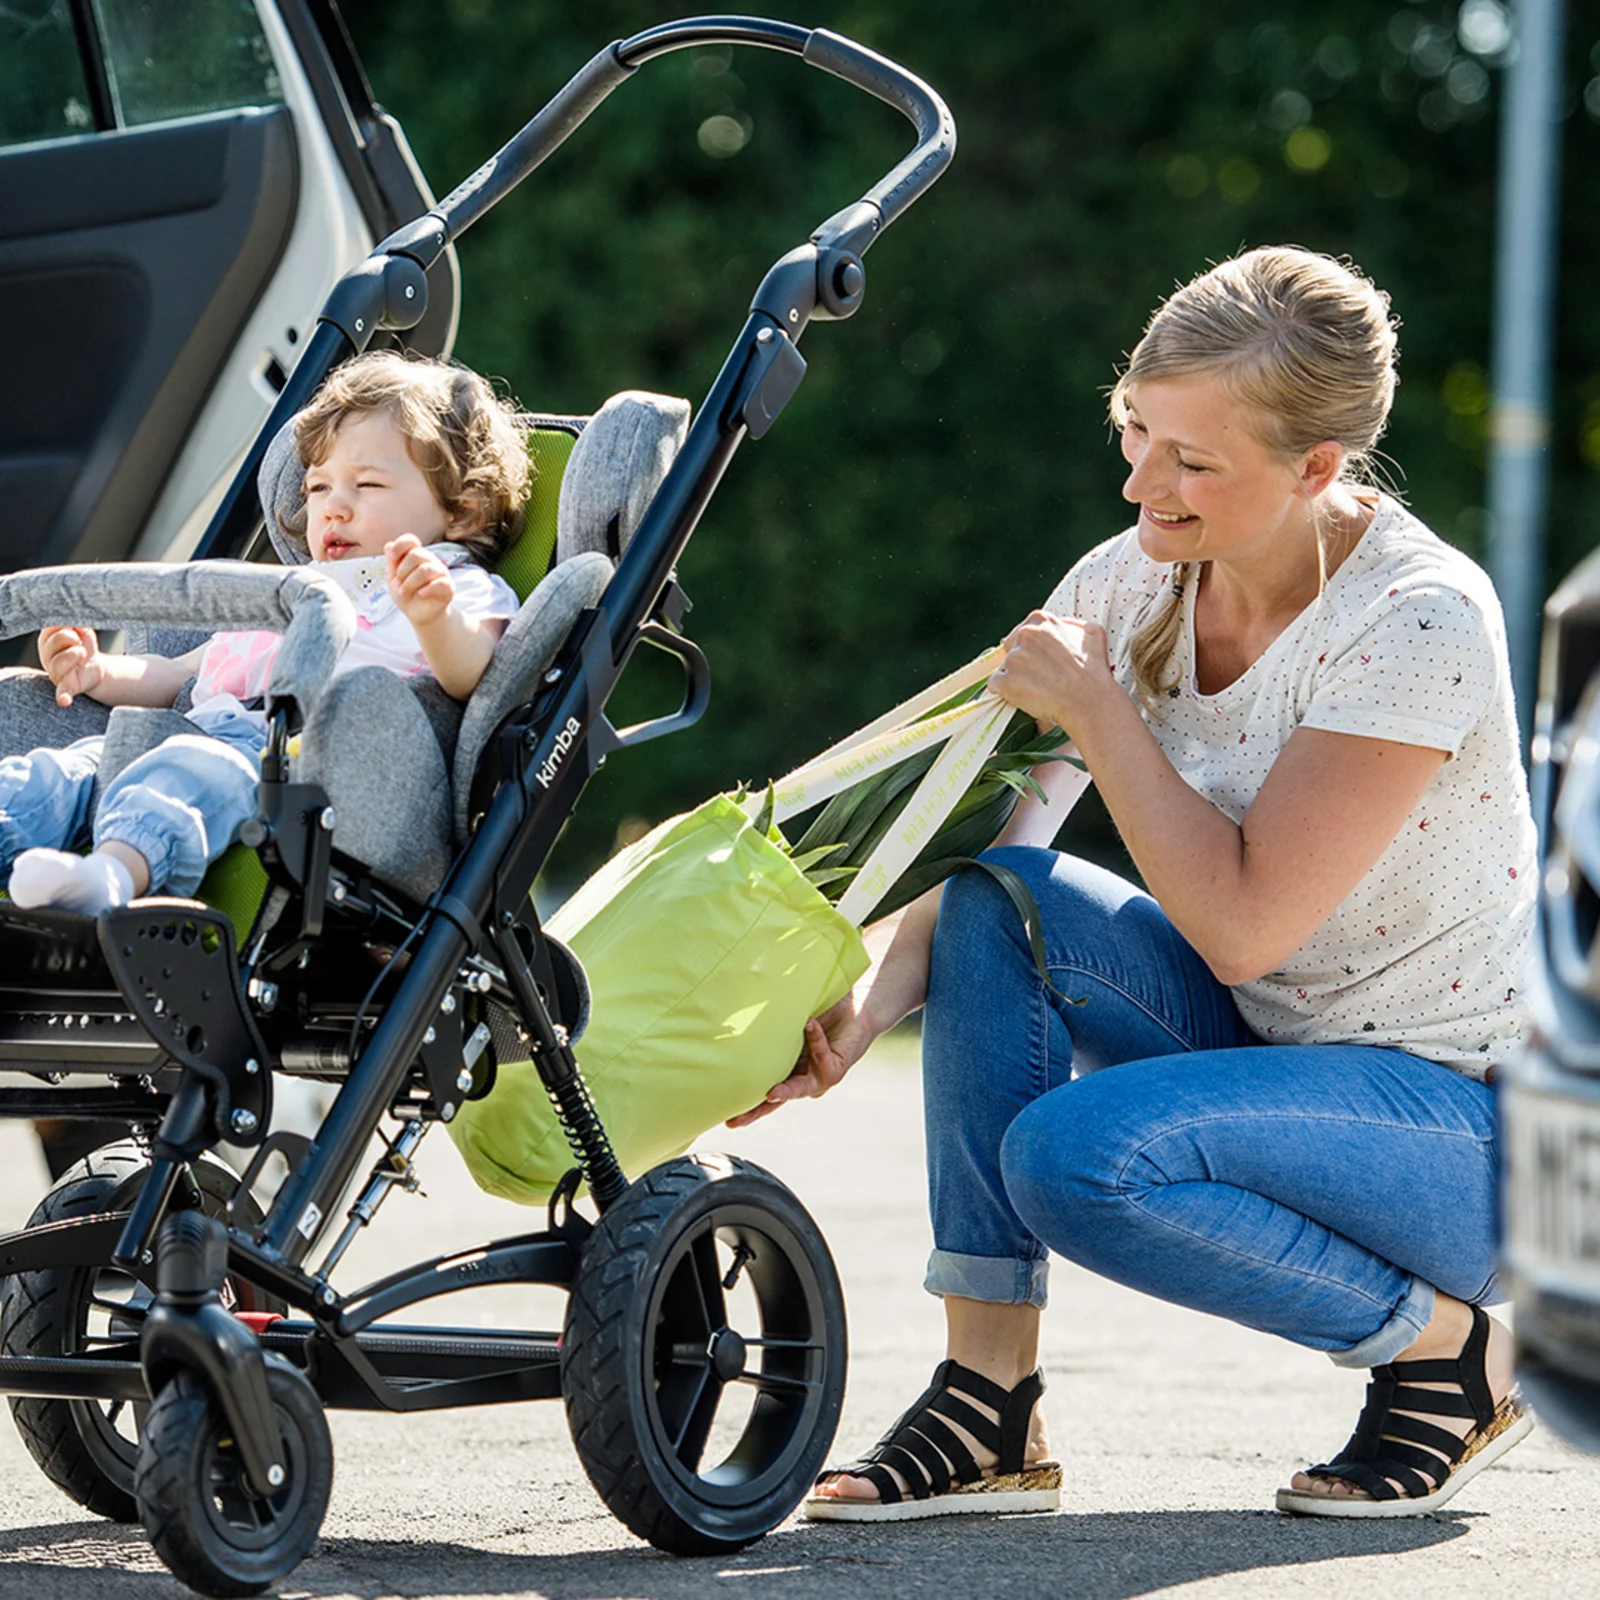 Kimba seating buggy has safety and functionality.